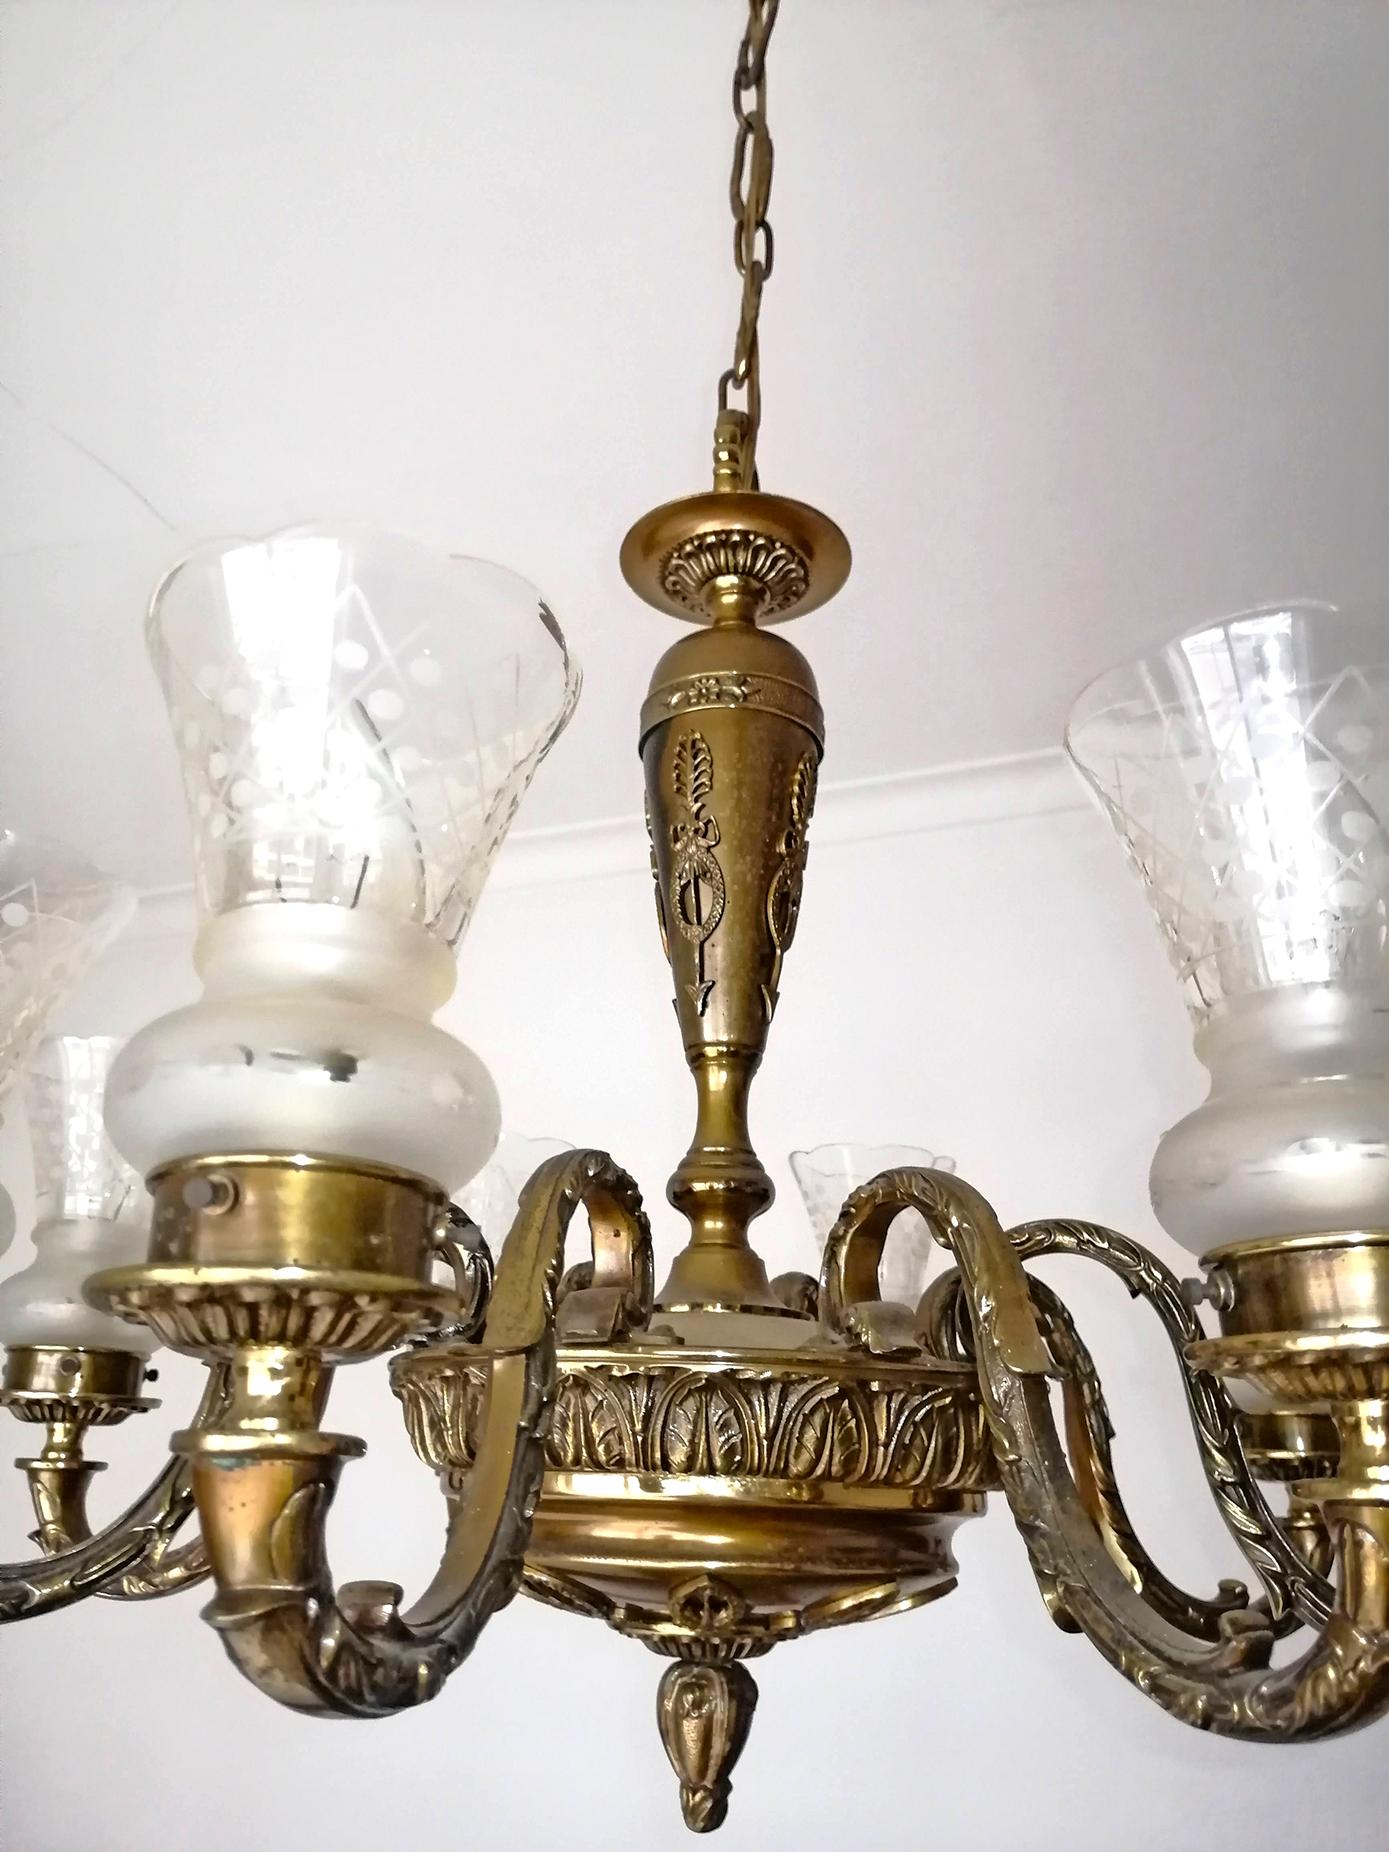 Antique French Empire Neoclassical Gilt Bronze Chandelier, Early 20th Century For Sale 1